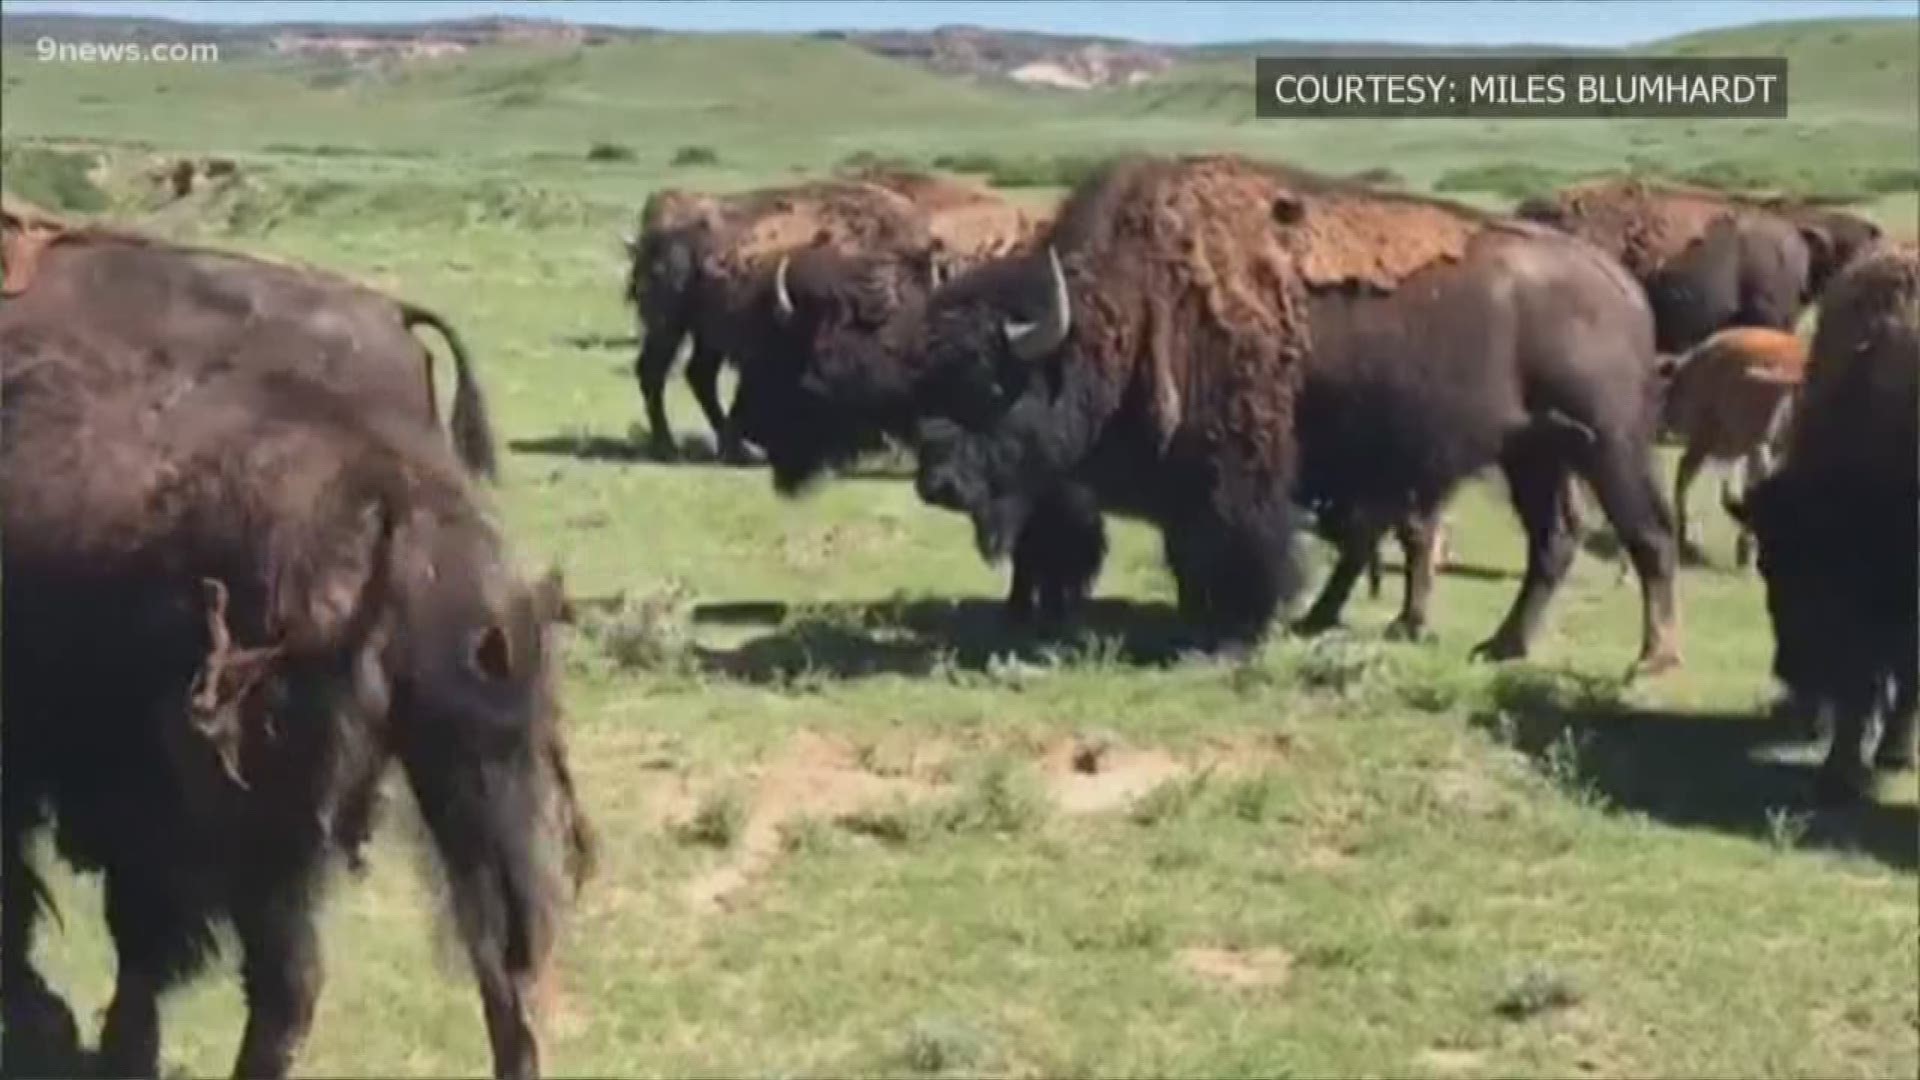 The herd now numbers 76 animals, including a dozen calves born just this year. The natural area doesn't have enough room for more than 100 bison.